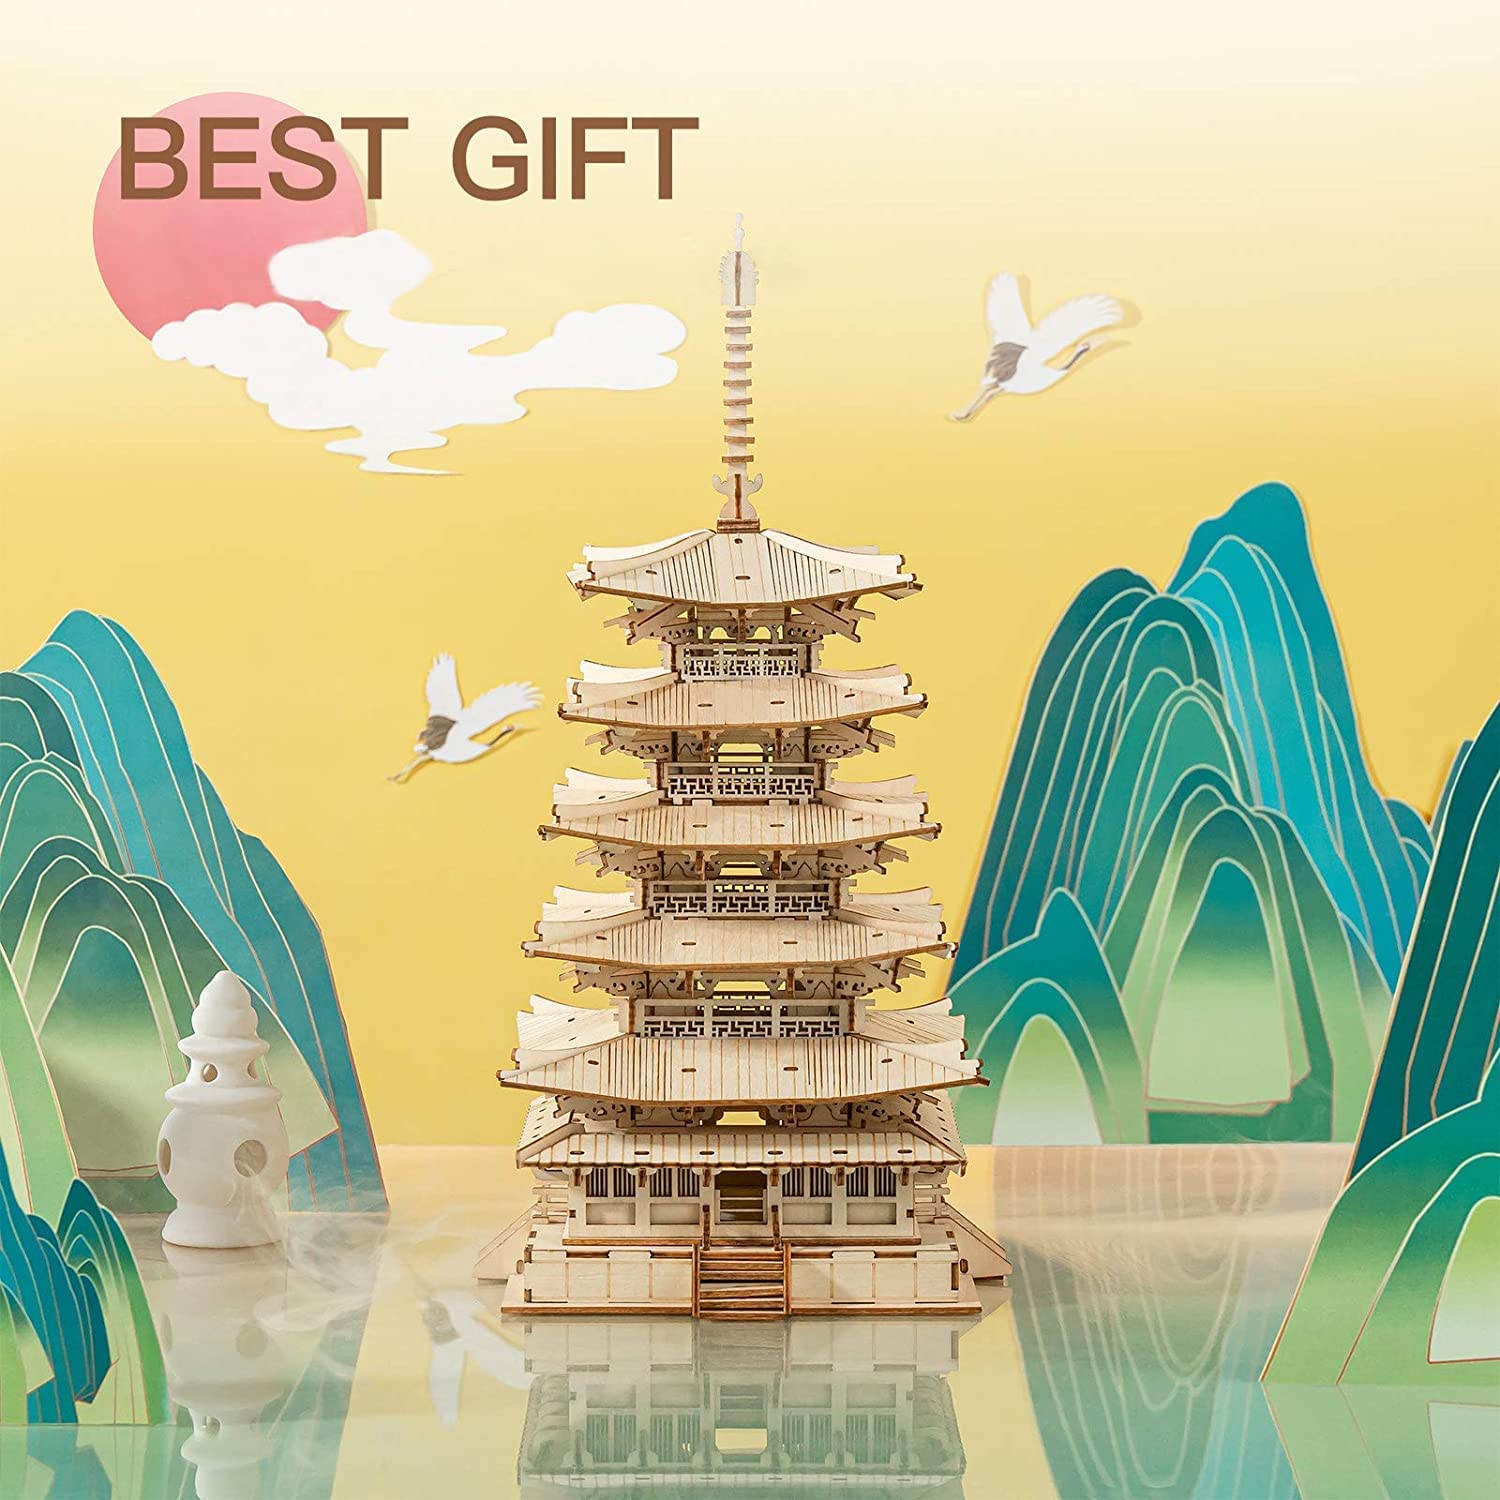 Fun and educational: The Robotime Five-Storied Pagoda 3D Wooden Puzzle for all ages.